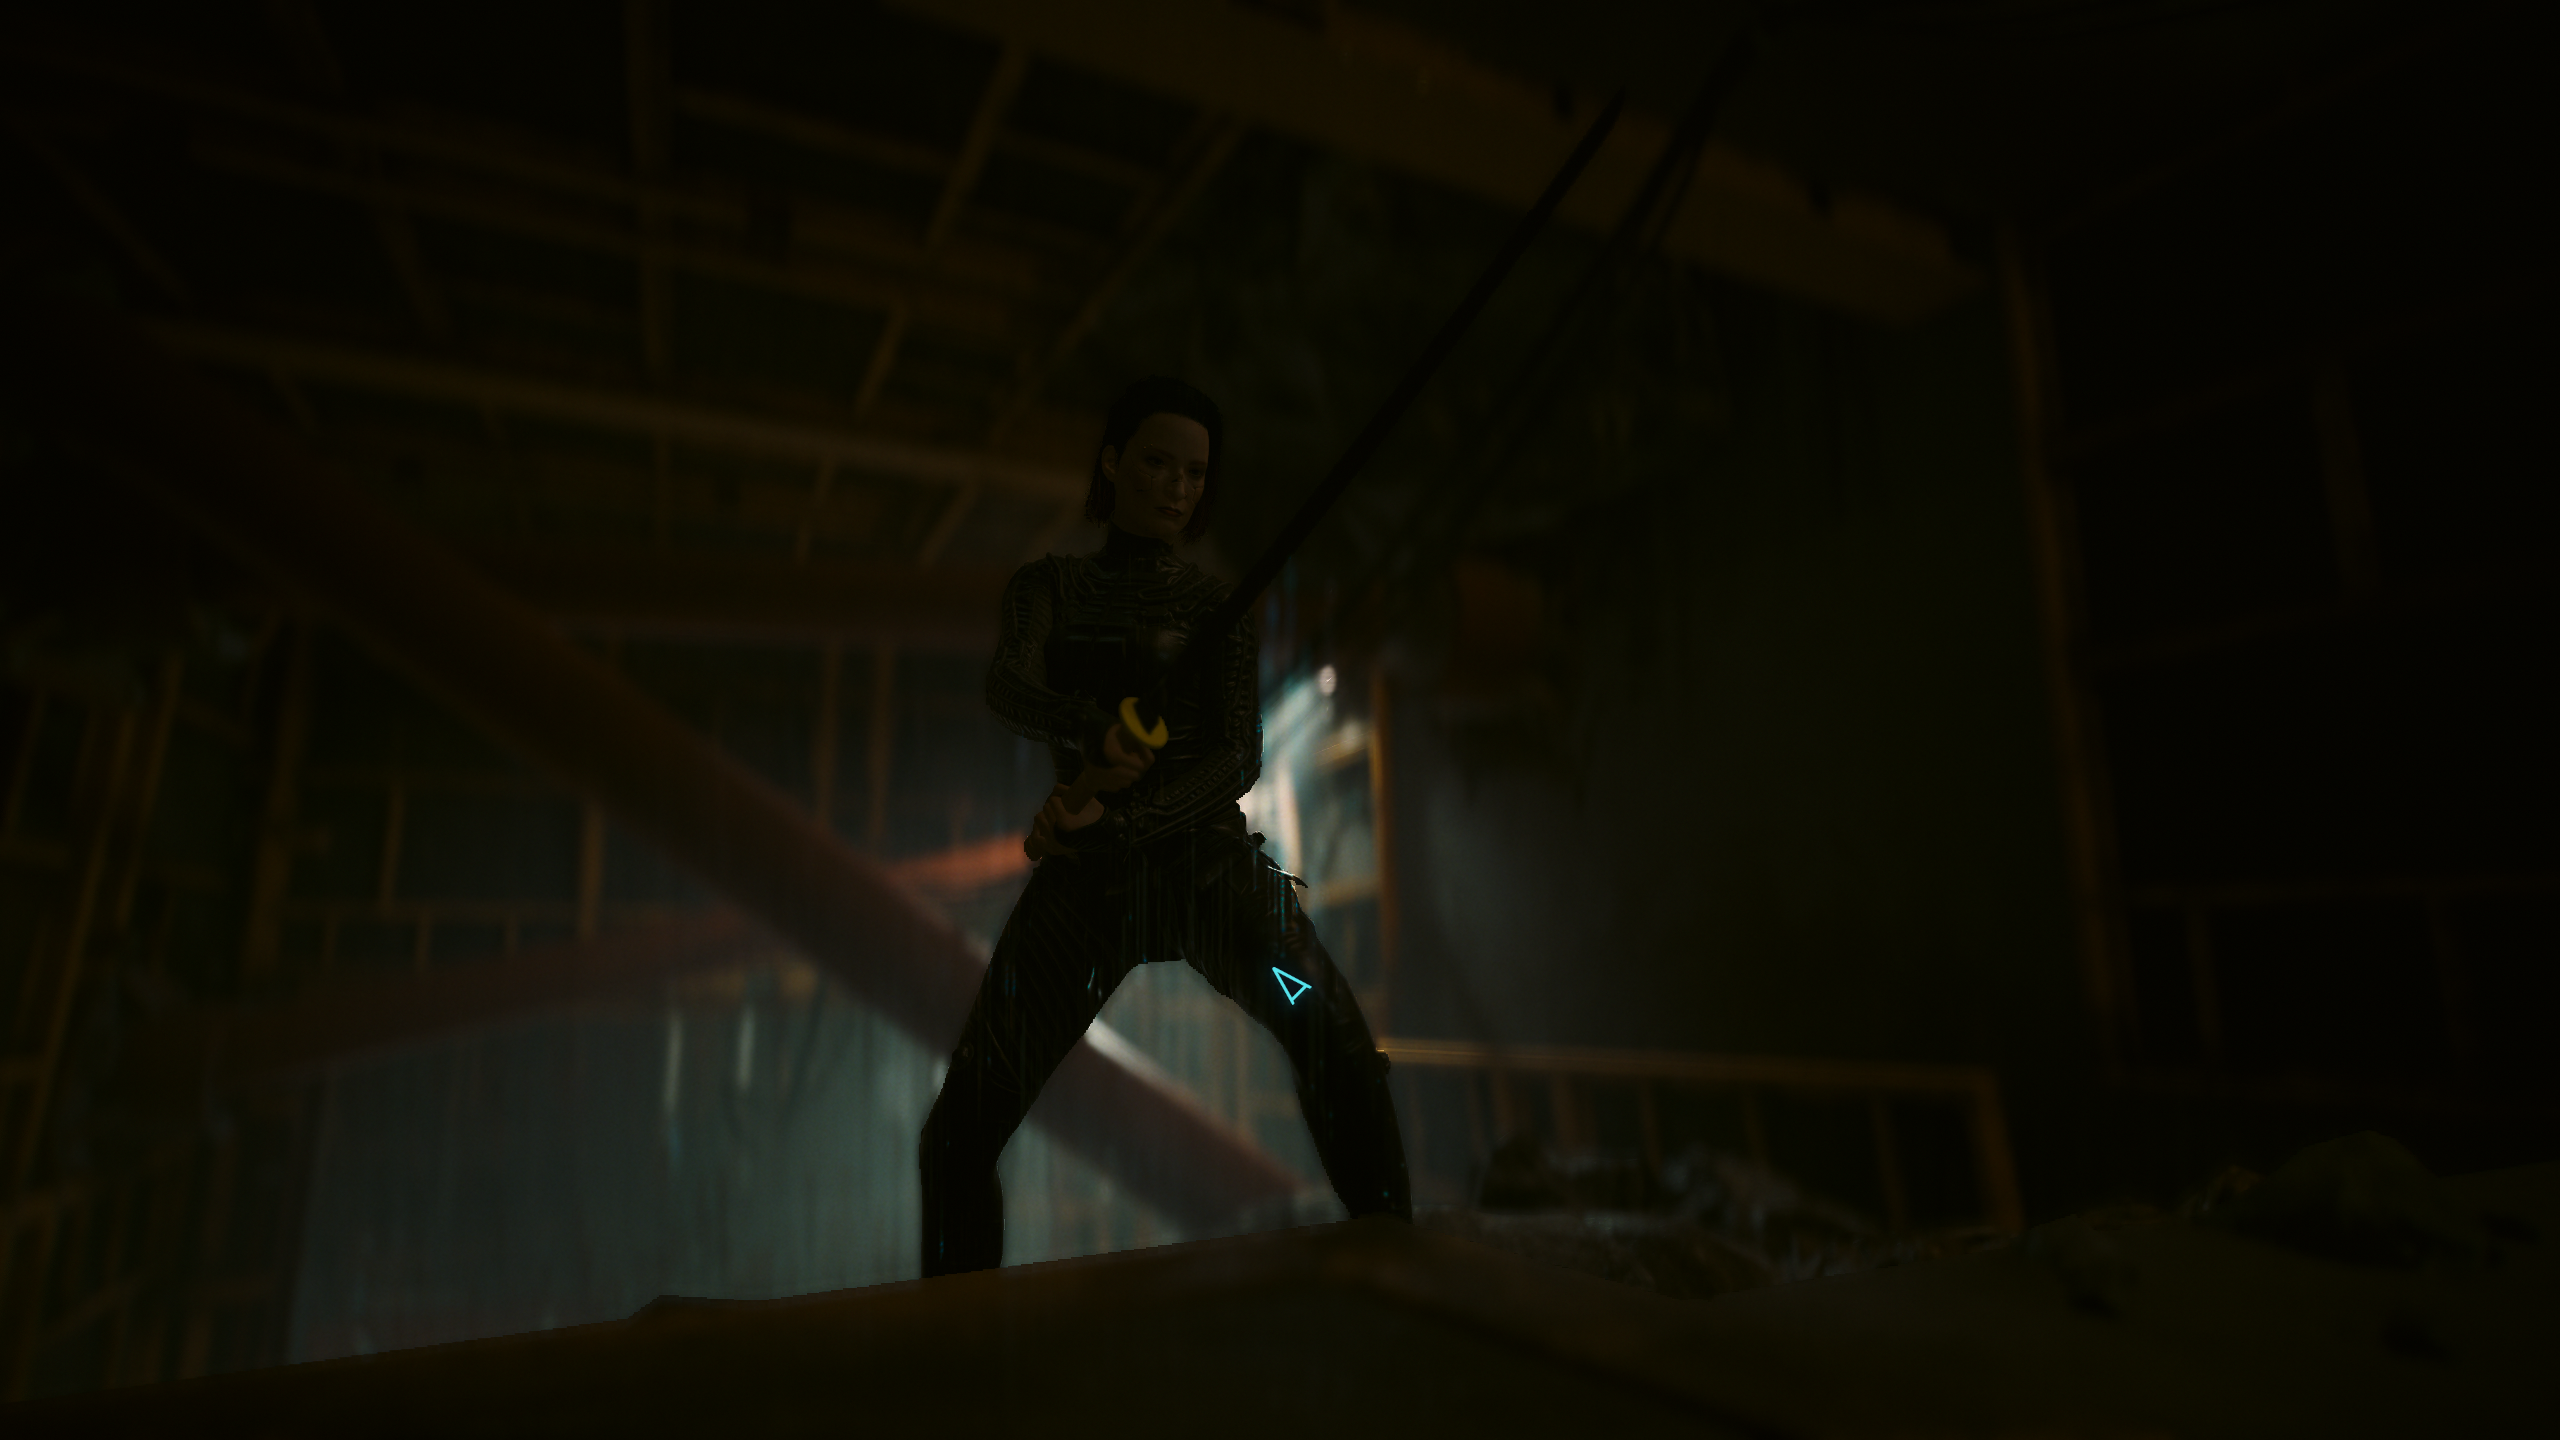 V with a katana equipped underneath Night City in Cyberpunk 2077.